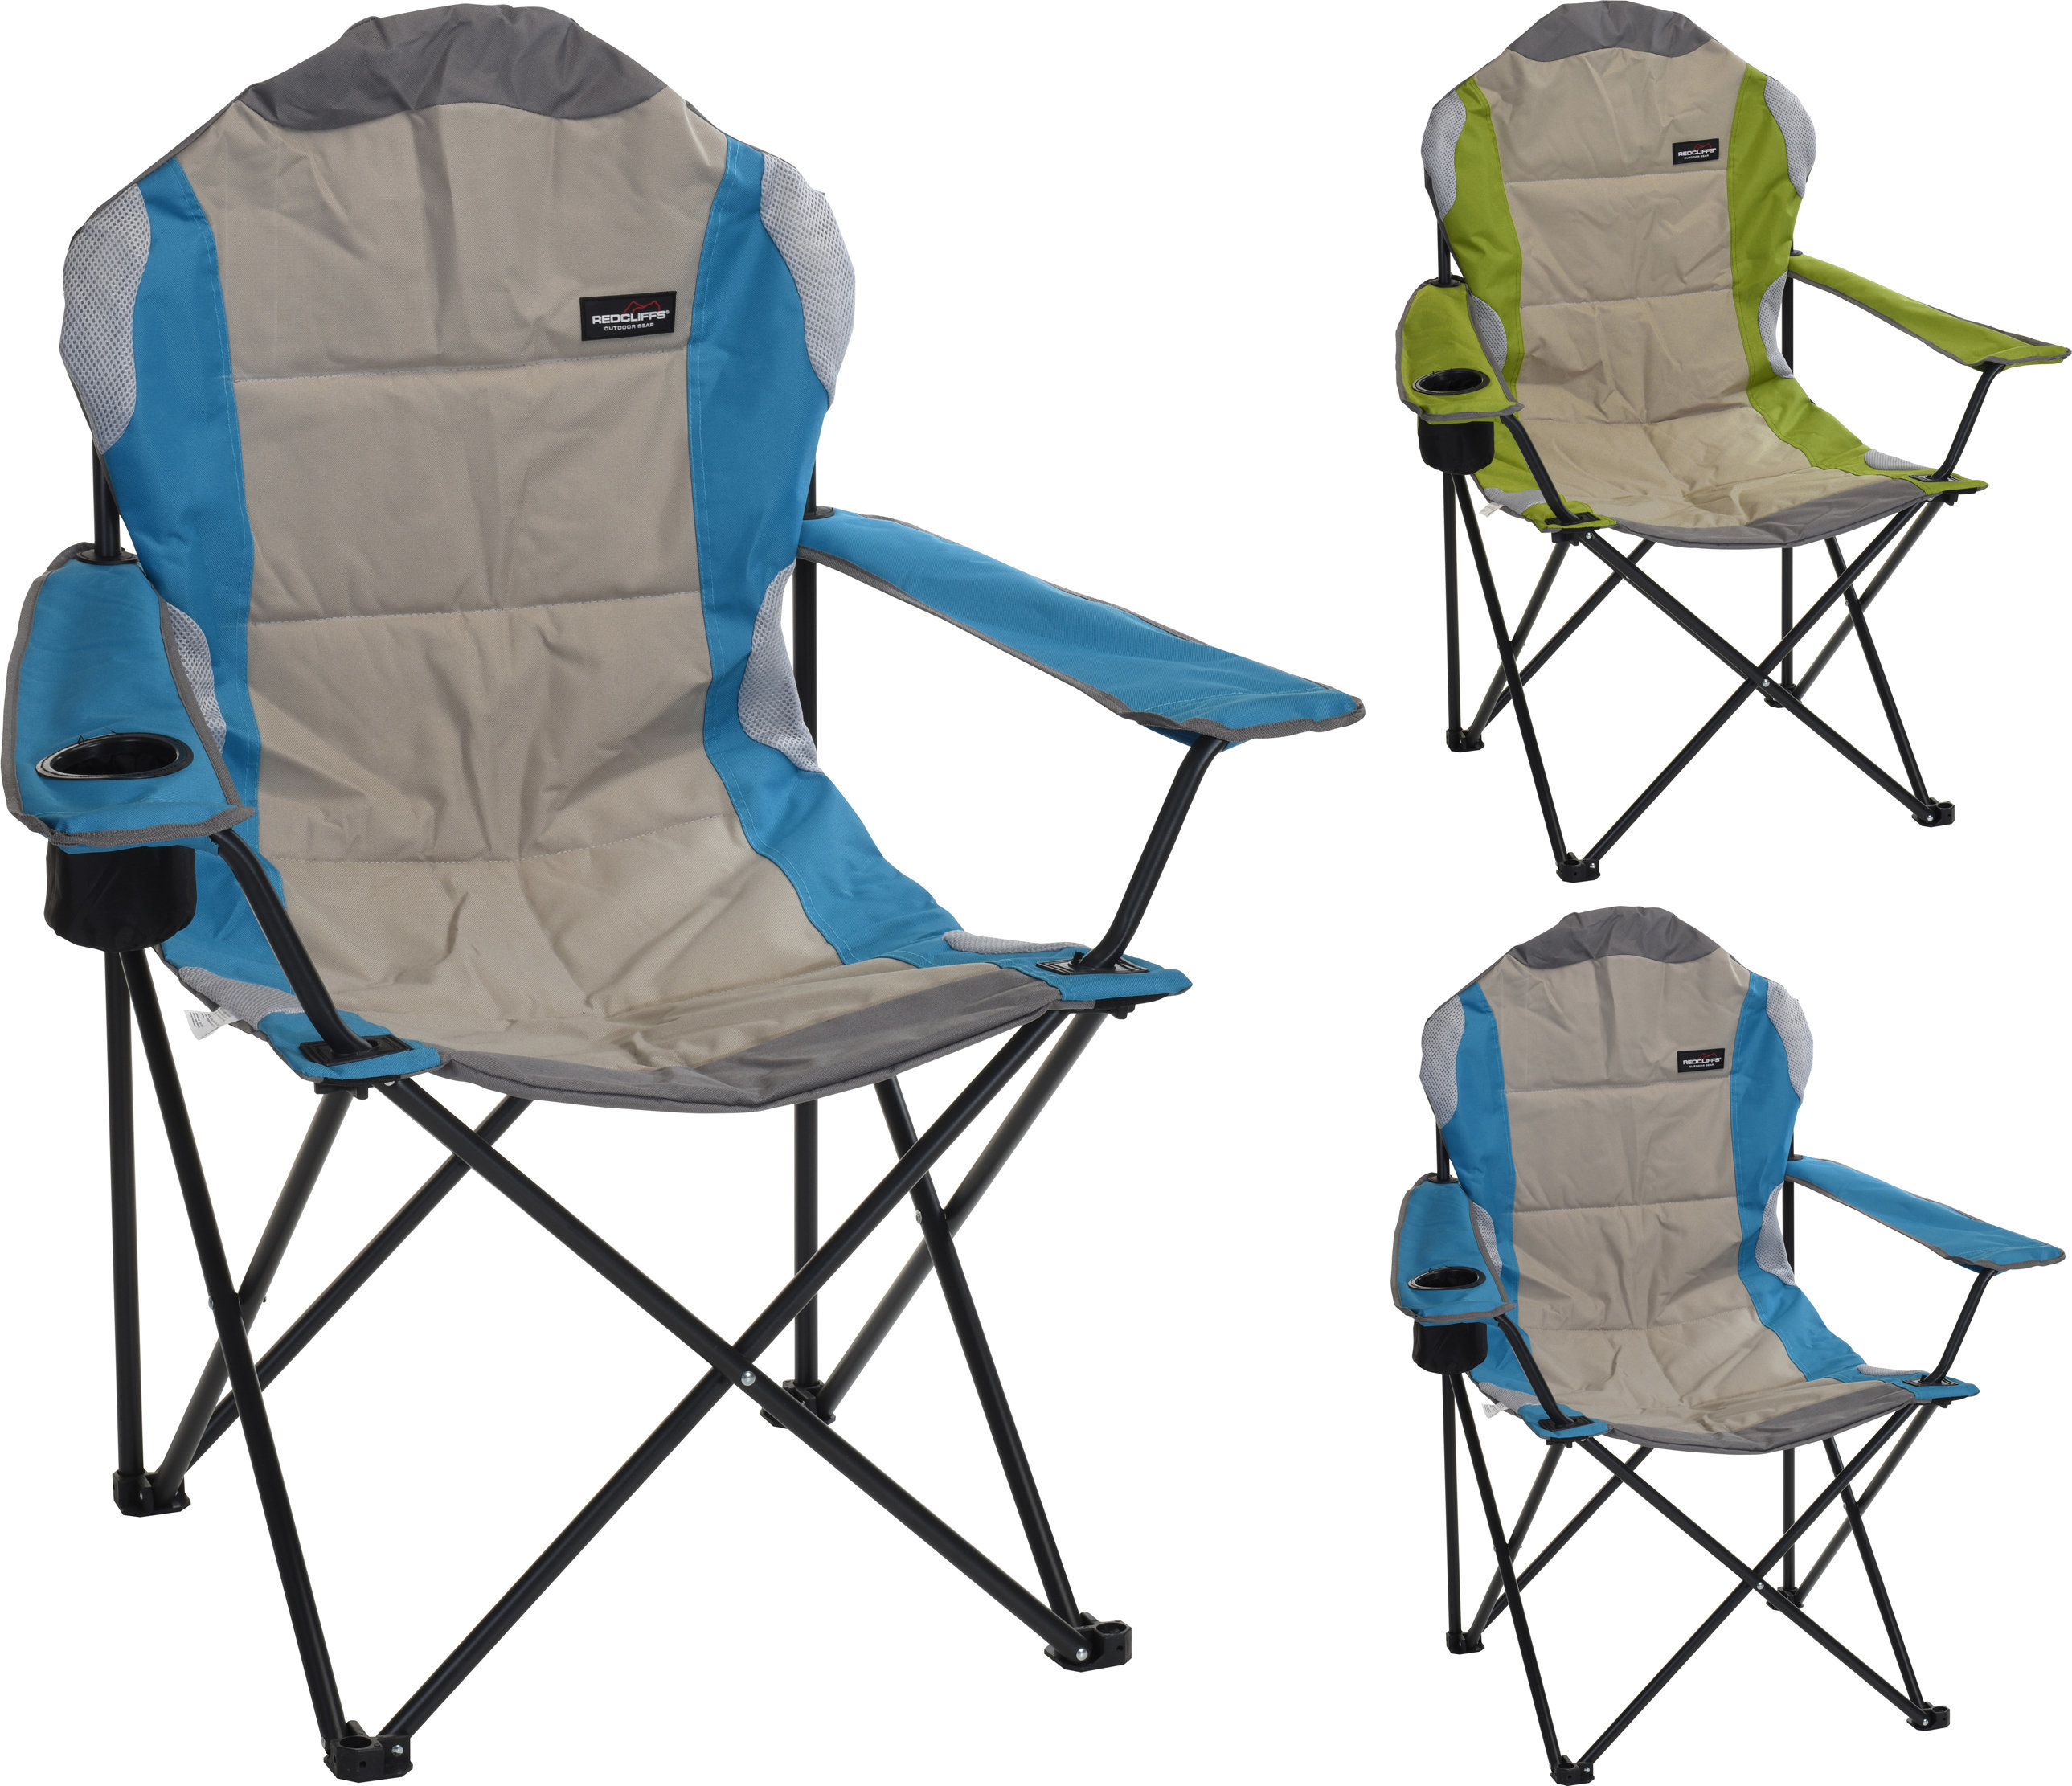 Redcliffs Outdoor Gear Foldable Chair